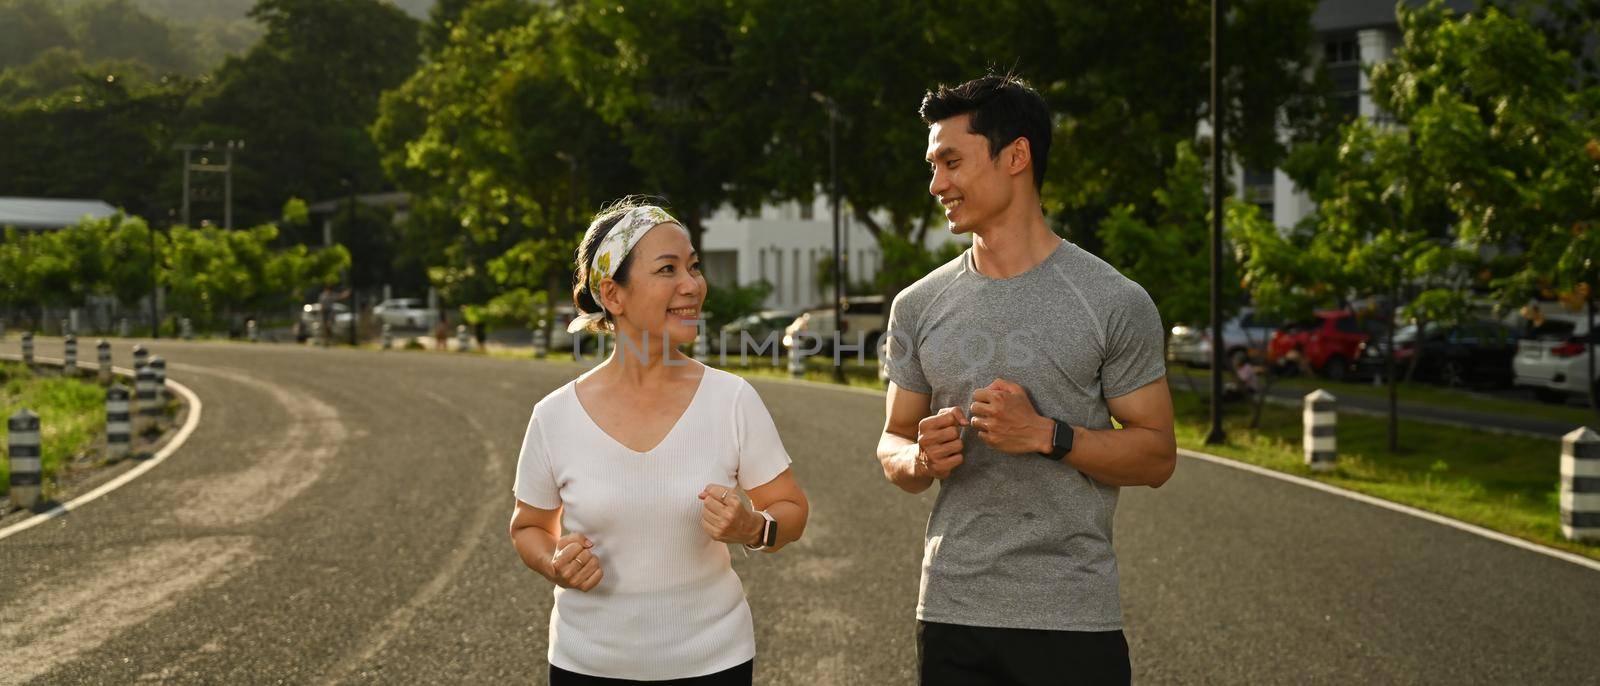 Energetic mature woman and young man jogging in the park. Fitness, sport and healthy lifestyle concept.